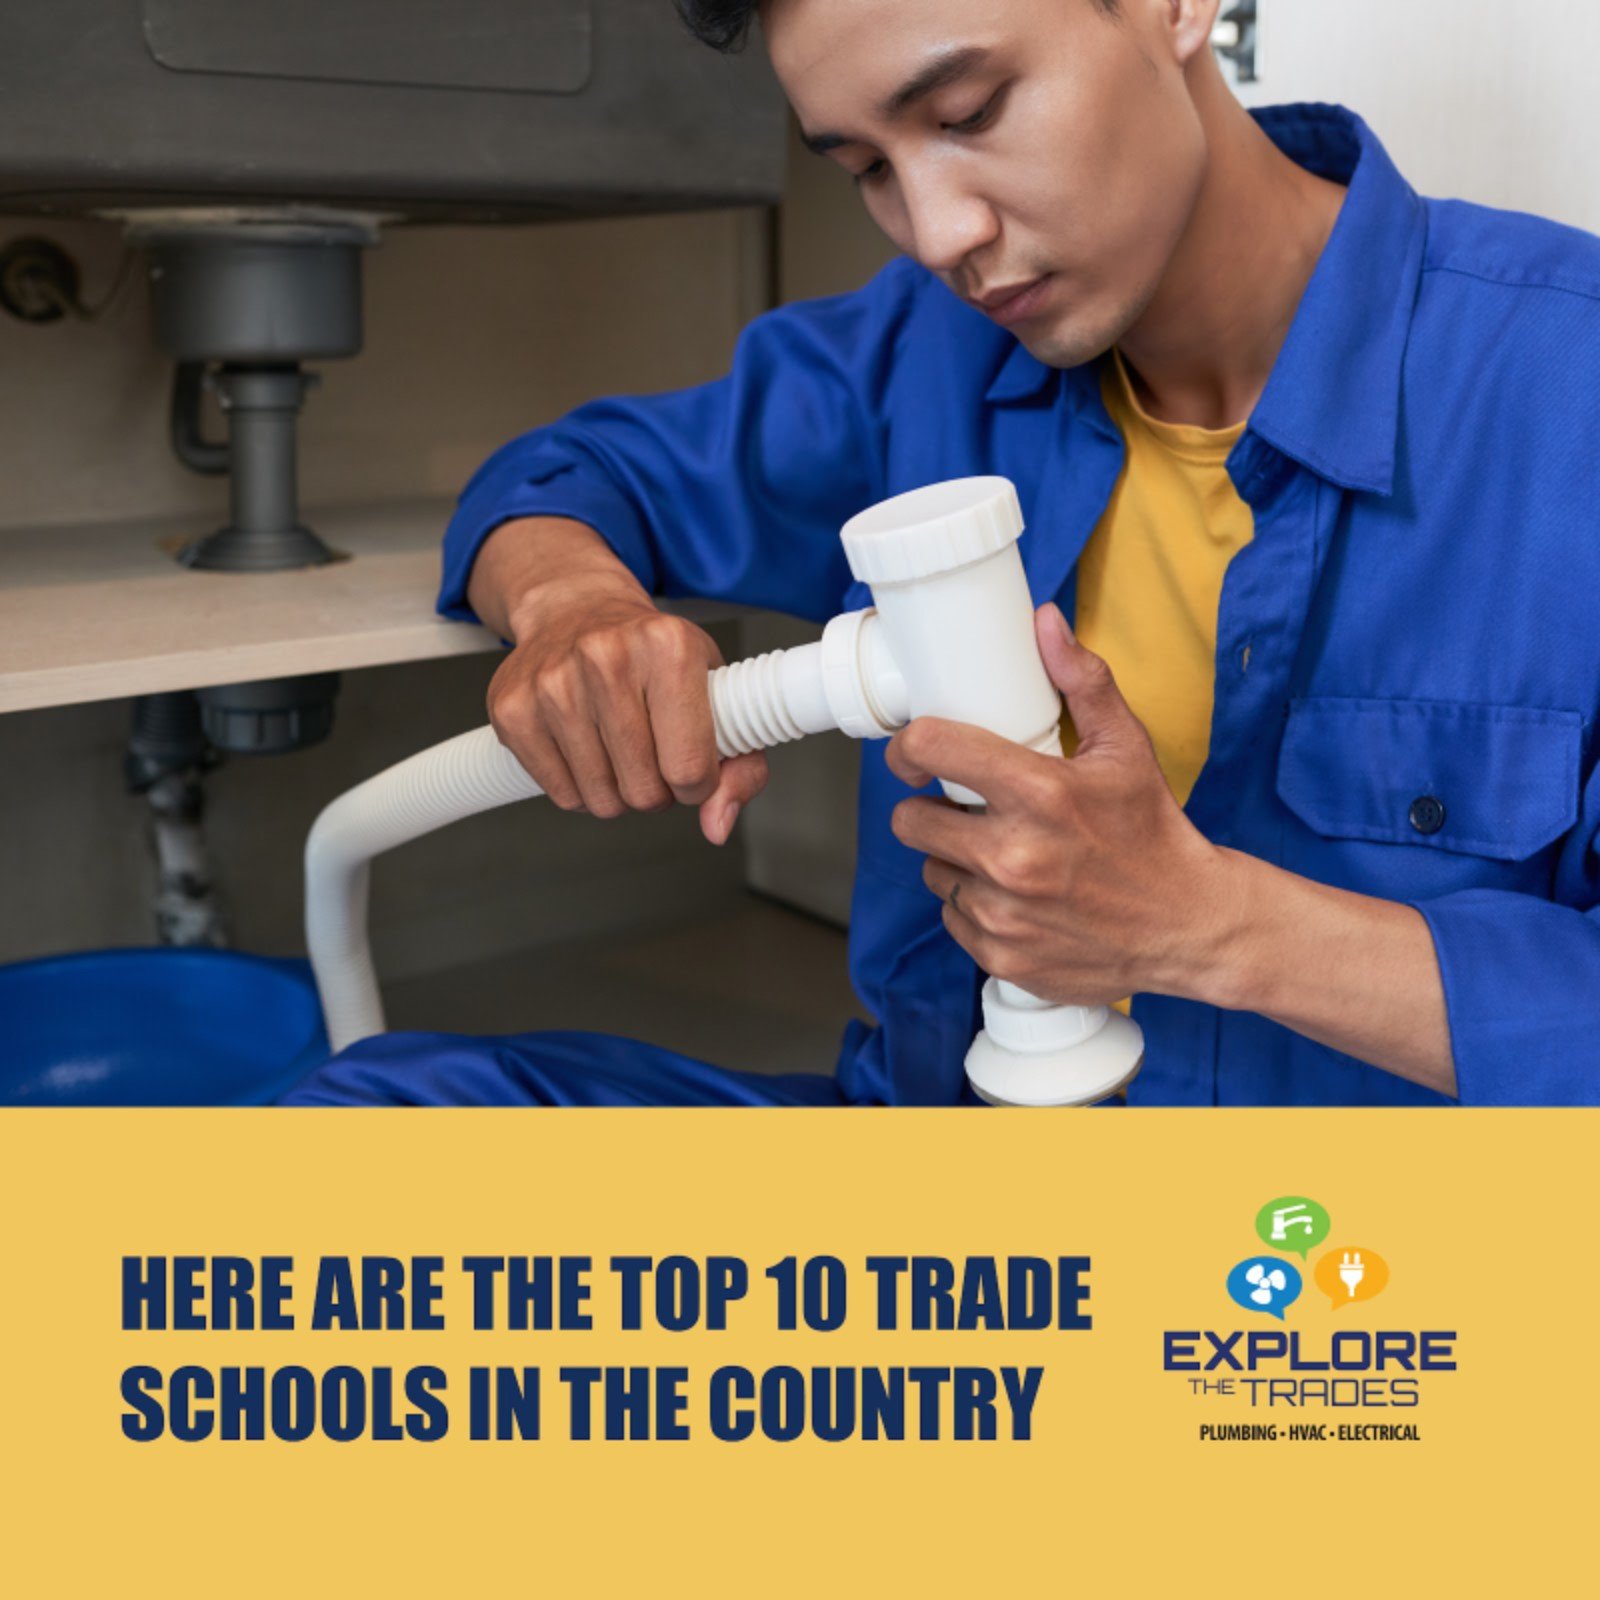 Here are the Top 10 Trade Schools in the Country